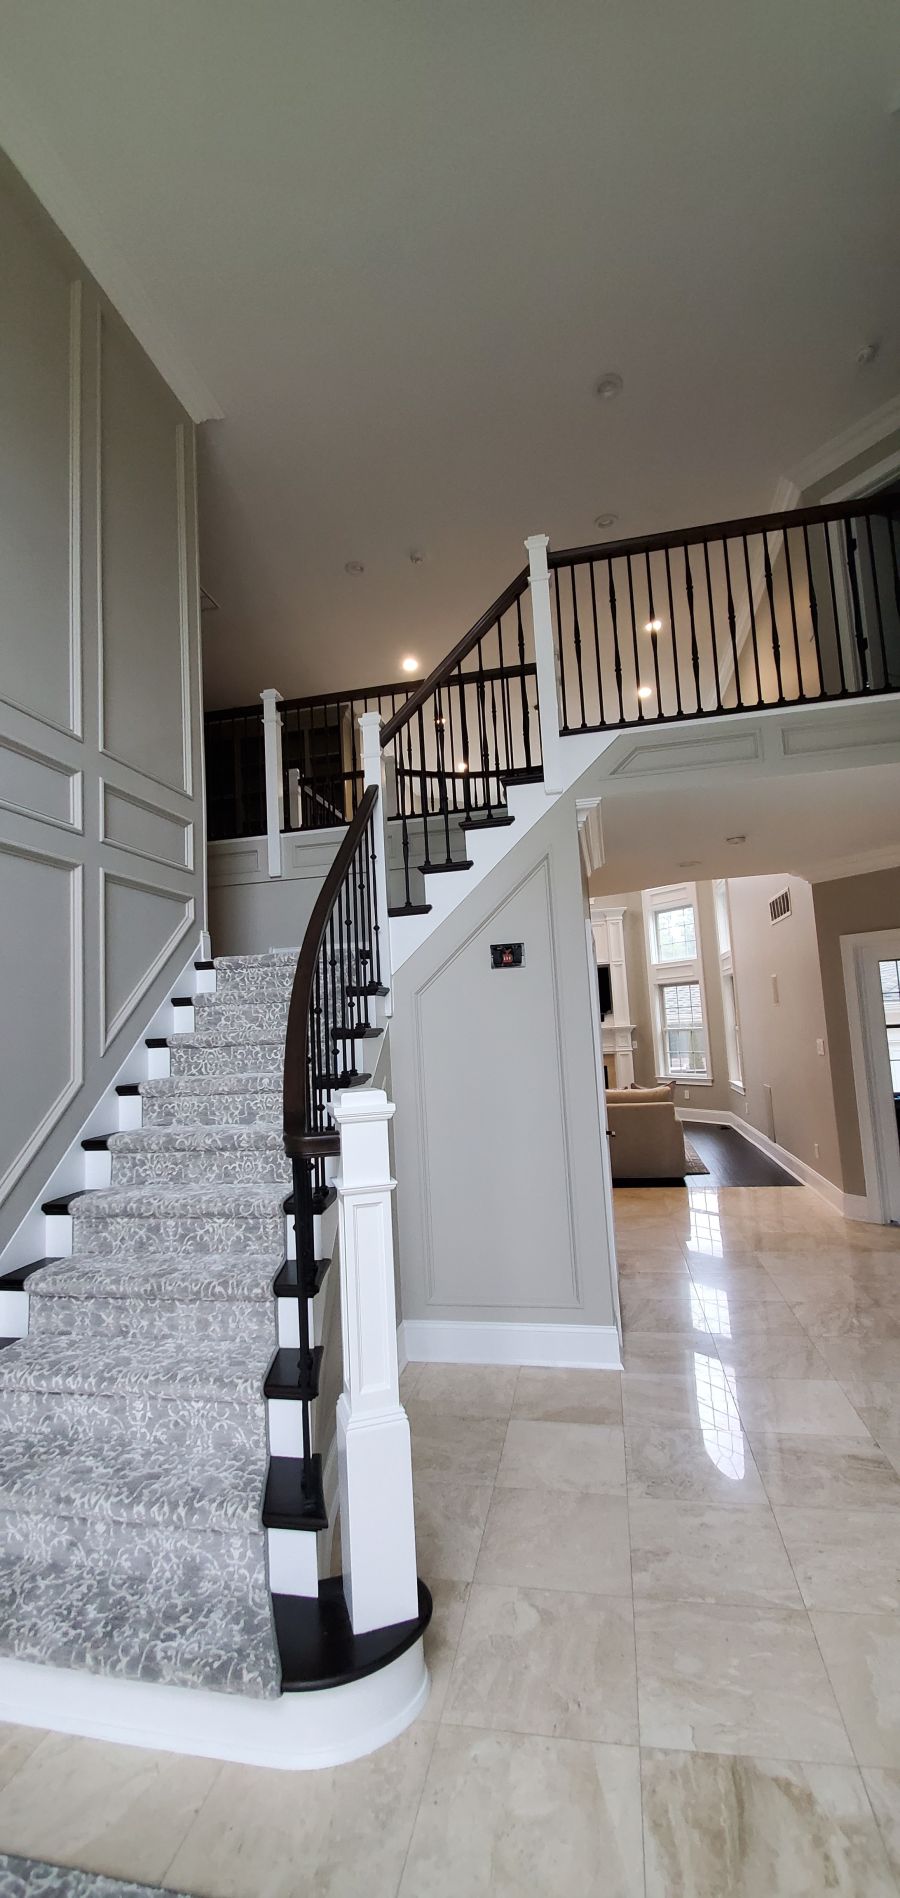 painting contractor in morristown nj